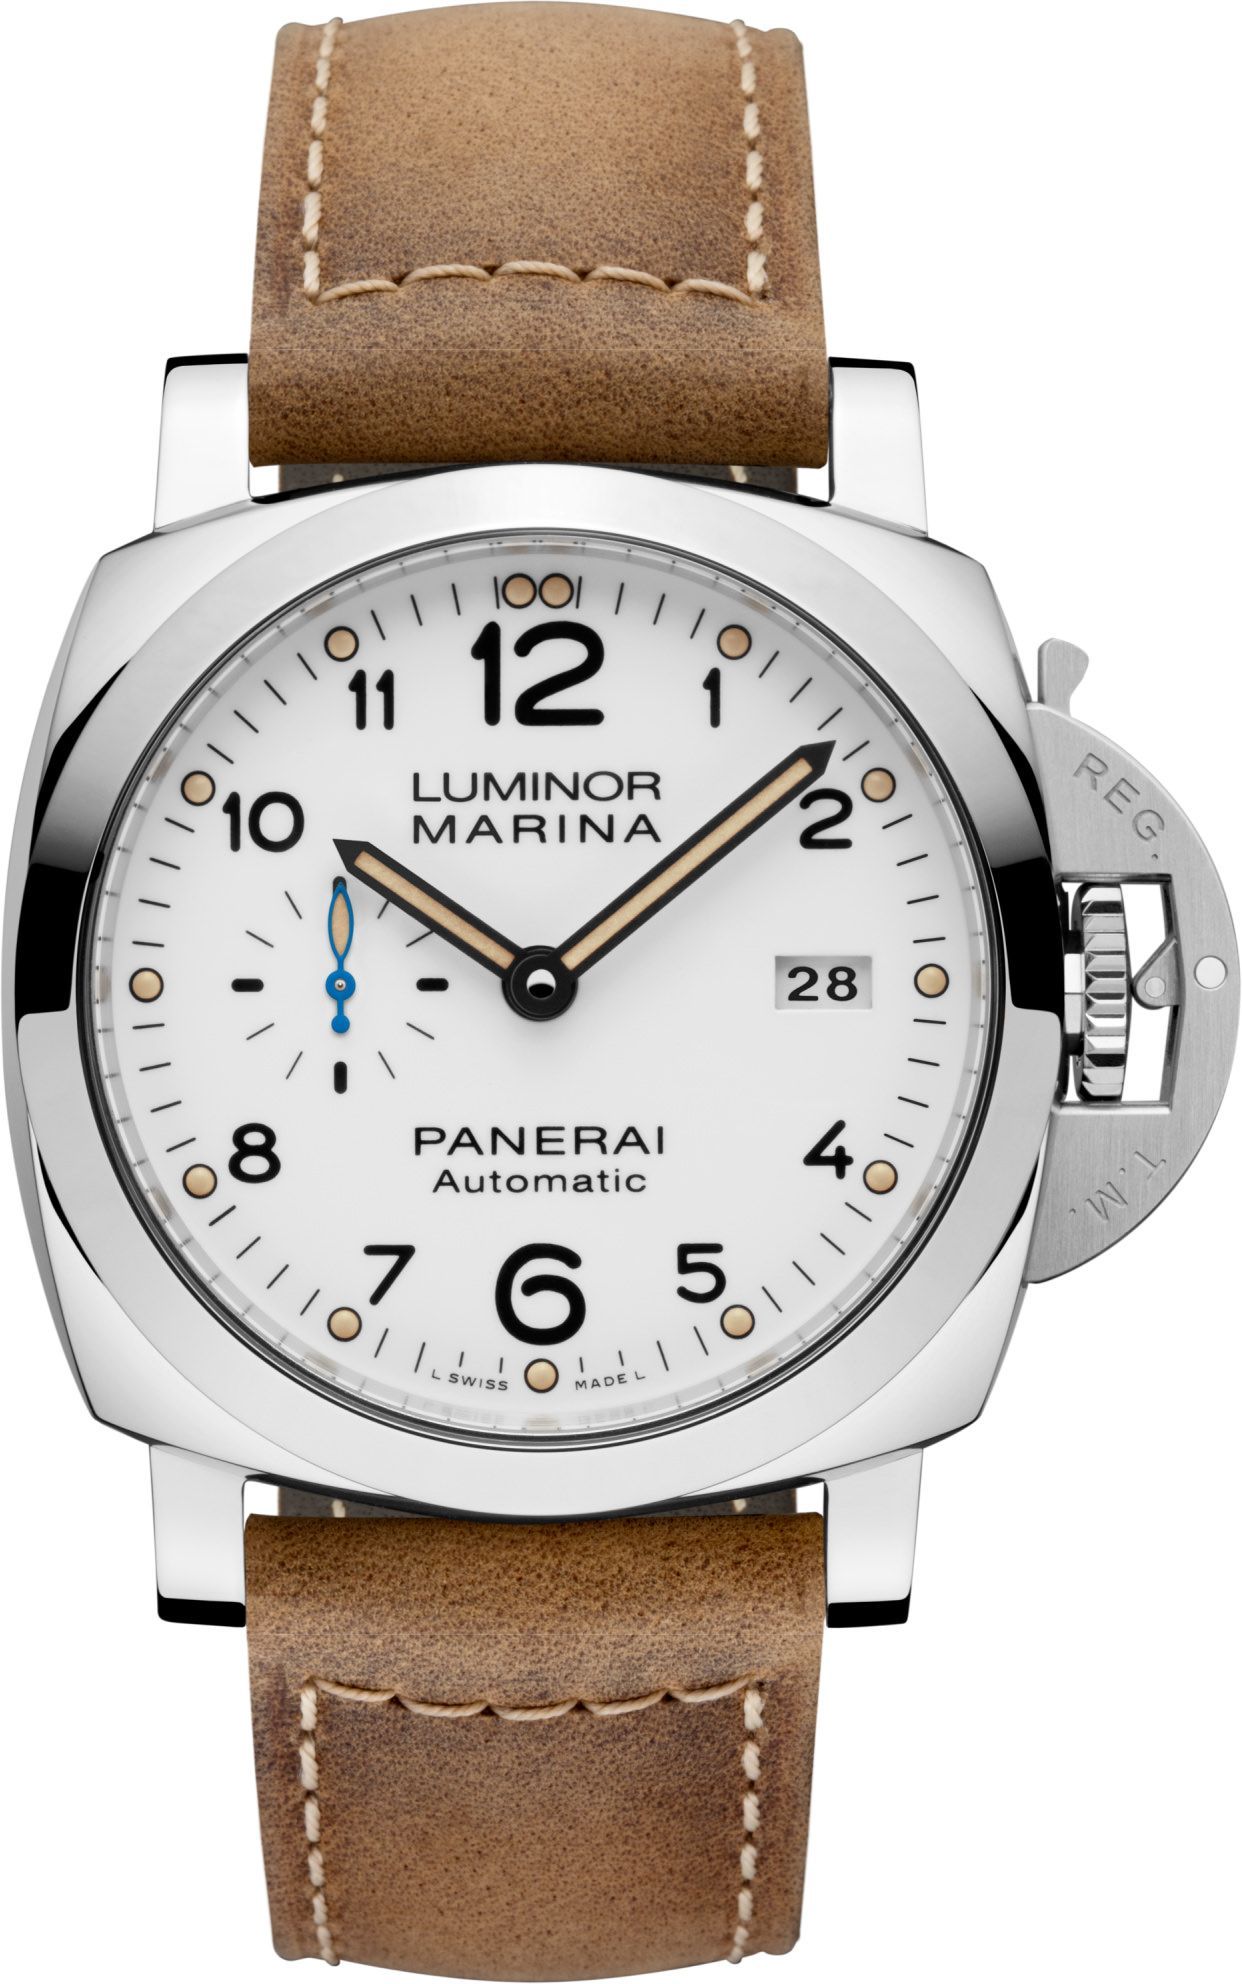 Panerai 3 Days Automatic 44 mm Watch in White Dial For Men - 1